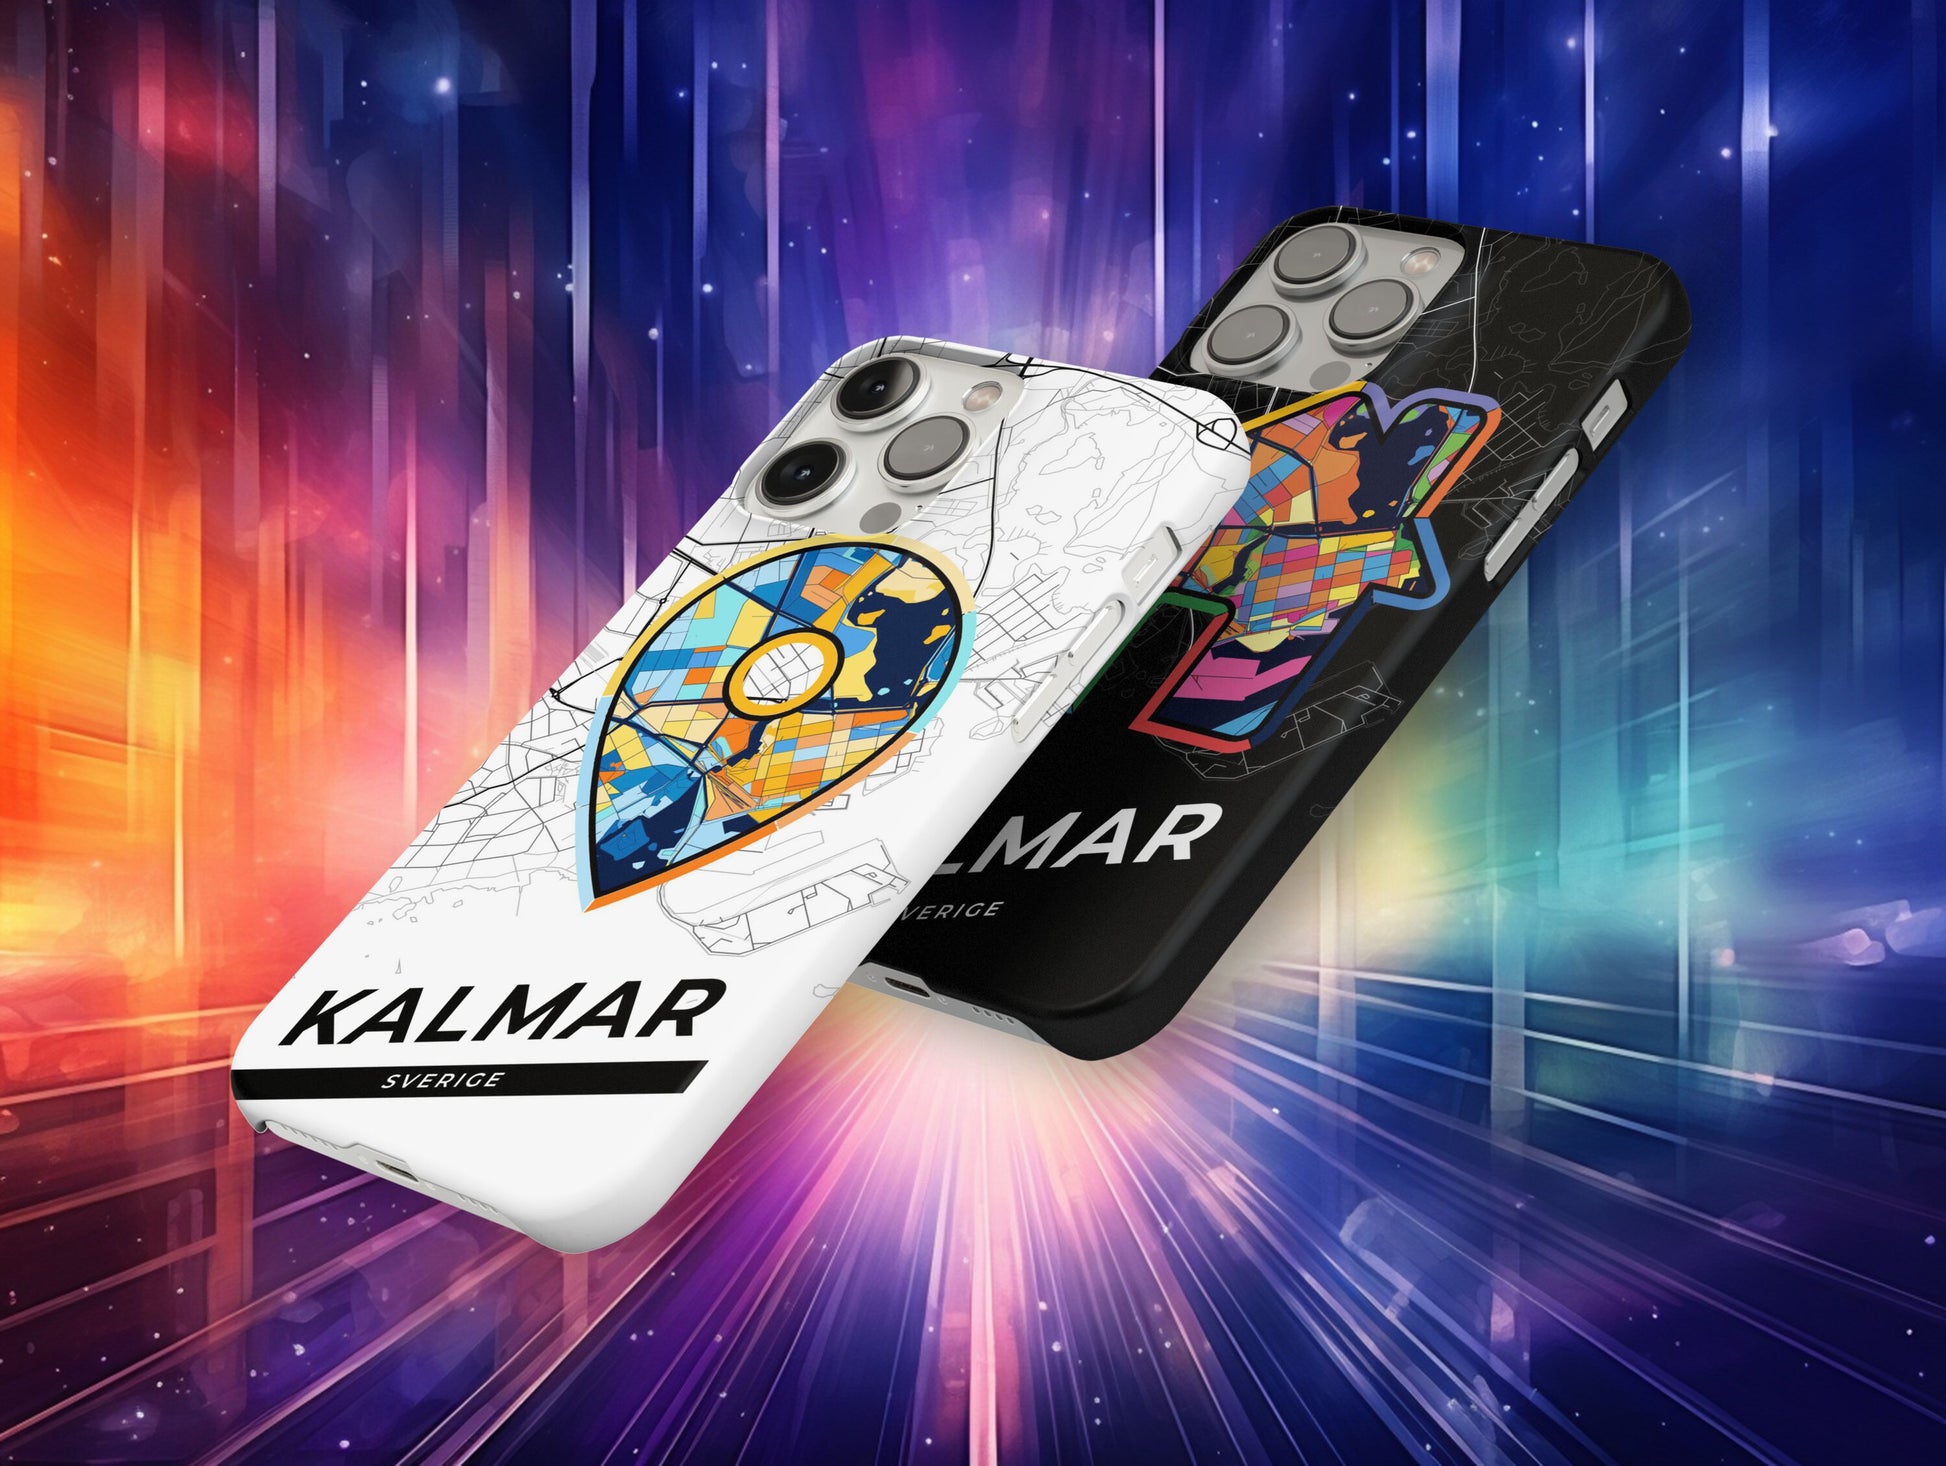 Kalmar Sweden slim phone case with colorful icon. Birthday, wedding or housewarming gift. Couple match cases.